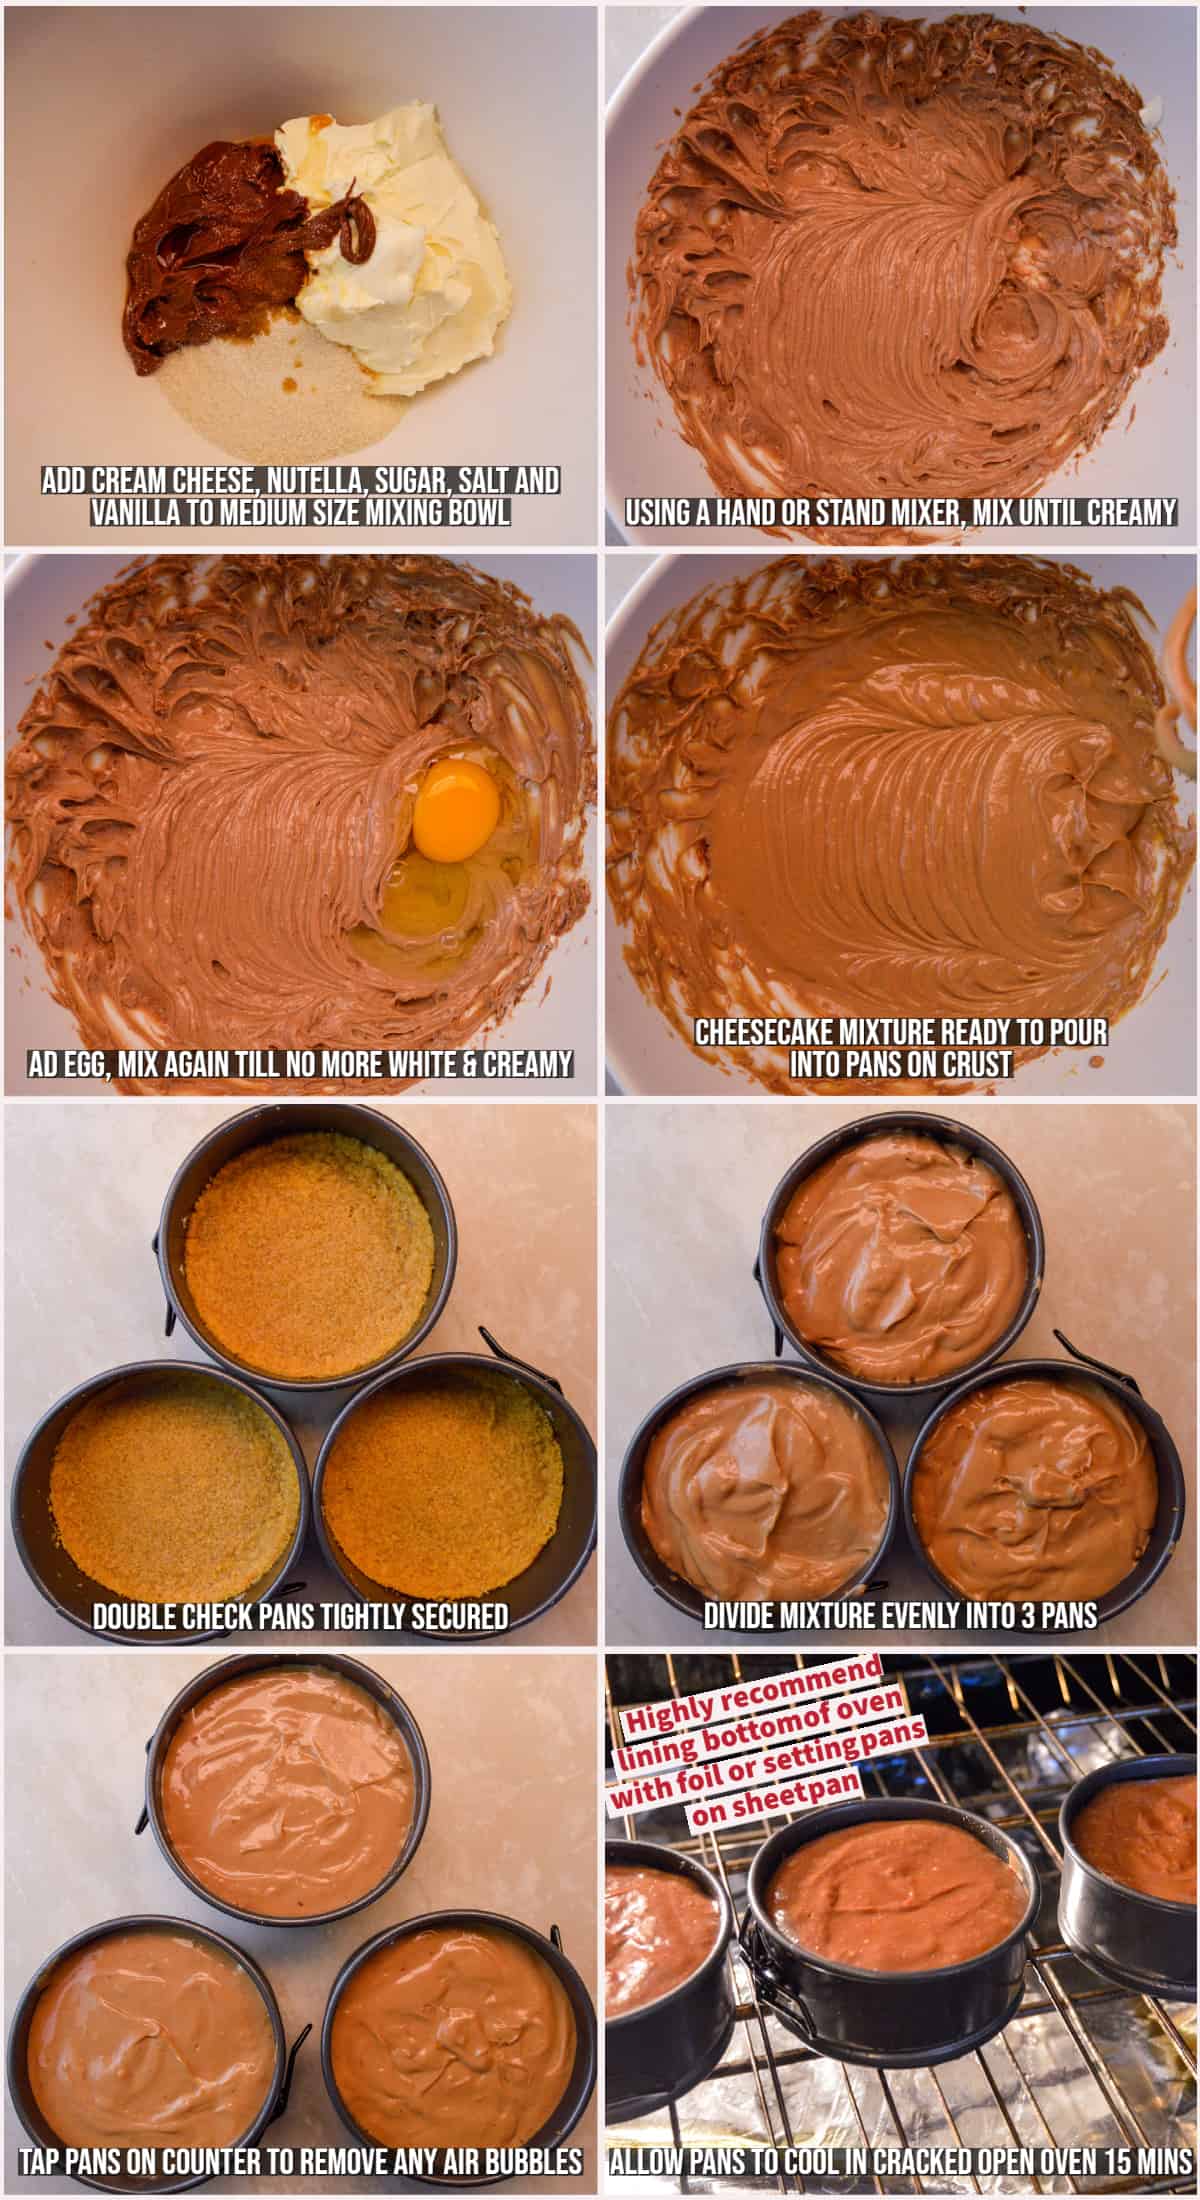 Steps shown to make Nutella cheesecake minis filling in mini springform pans 